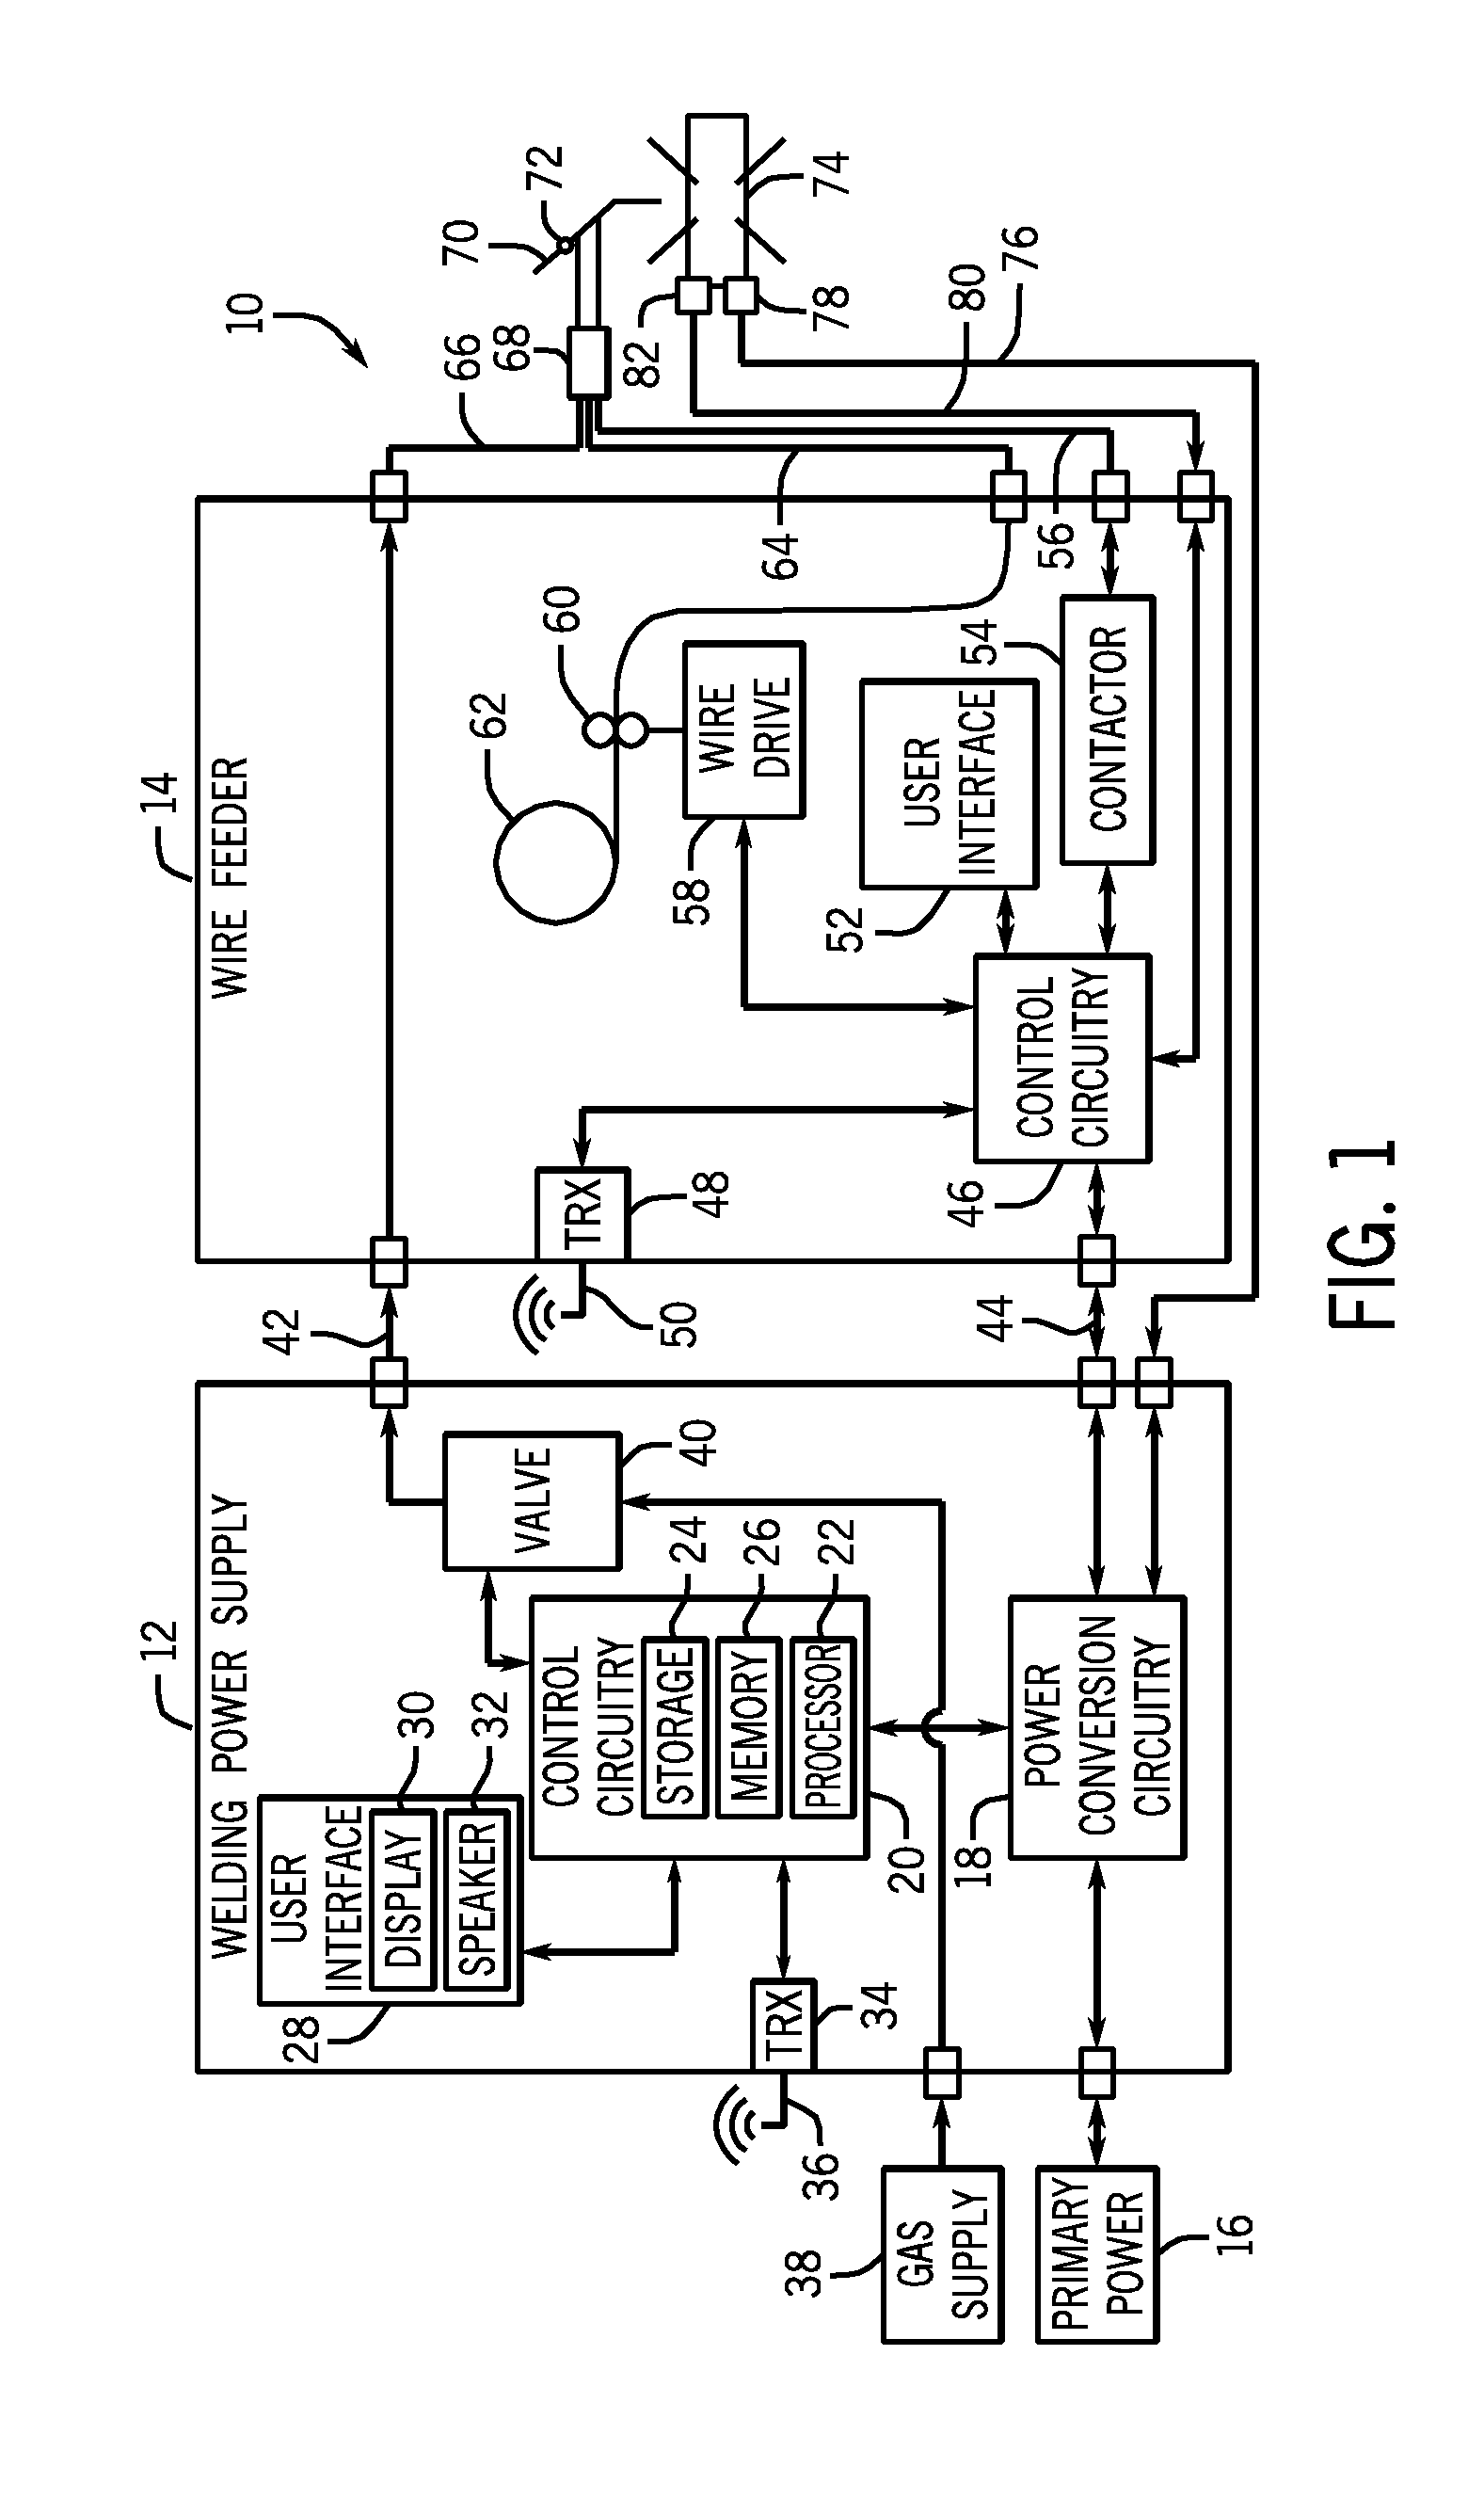 Systems and methods for training a welding operator